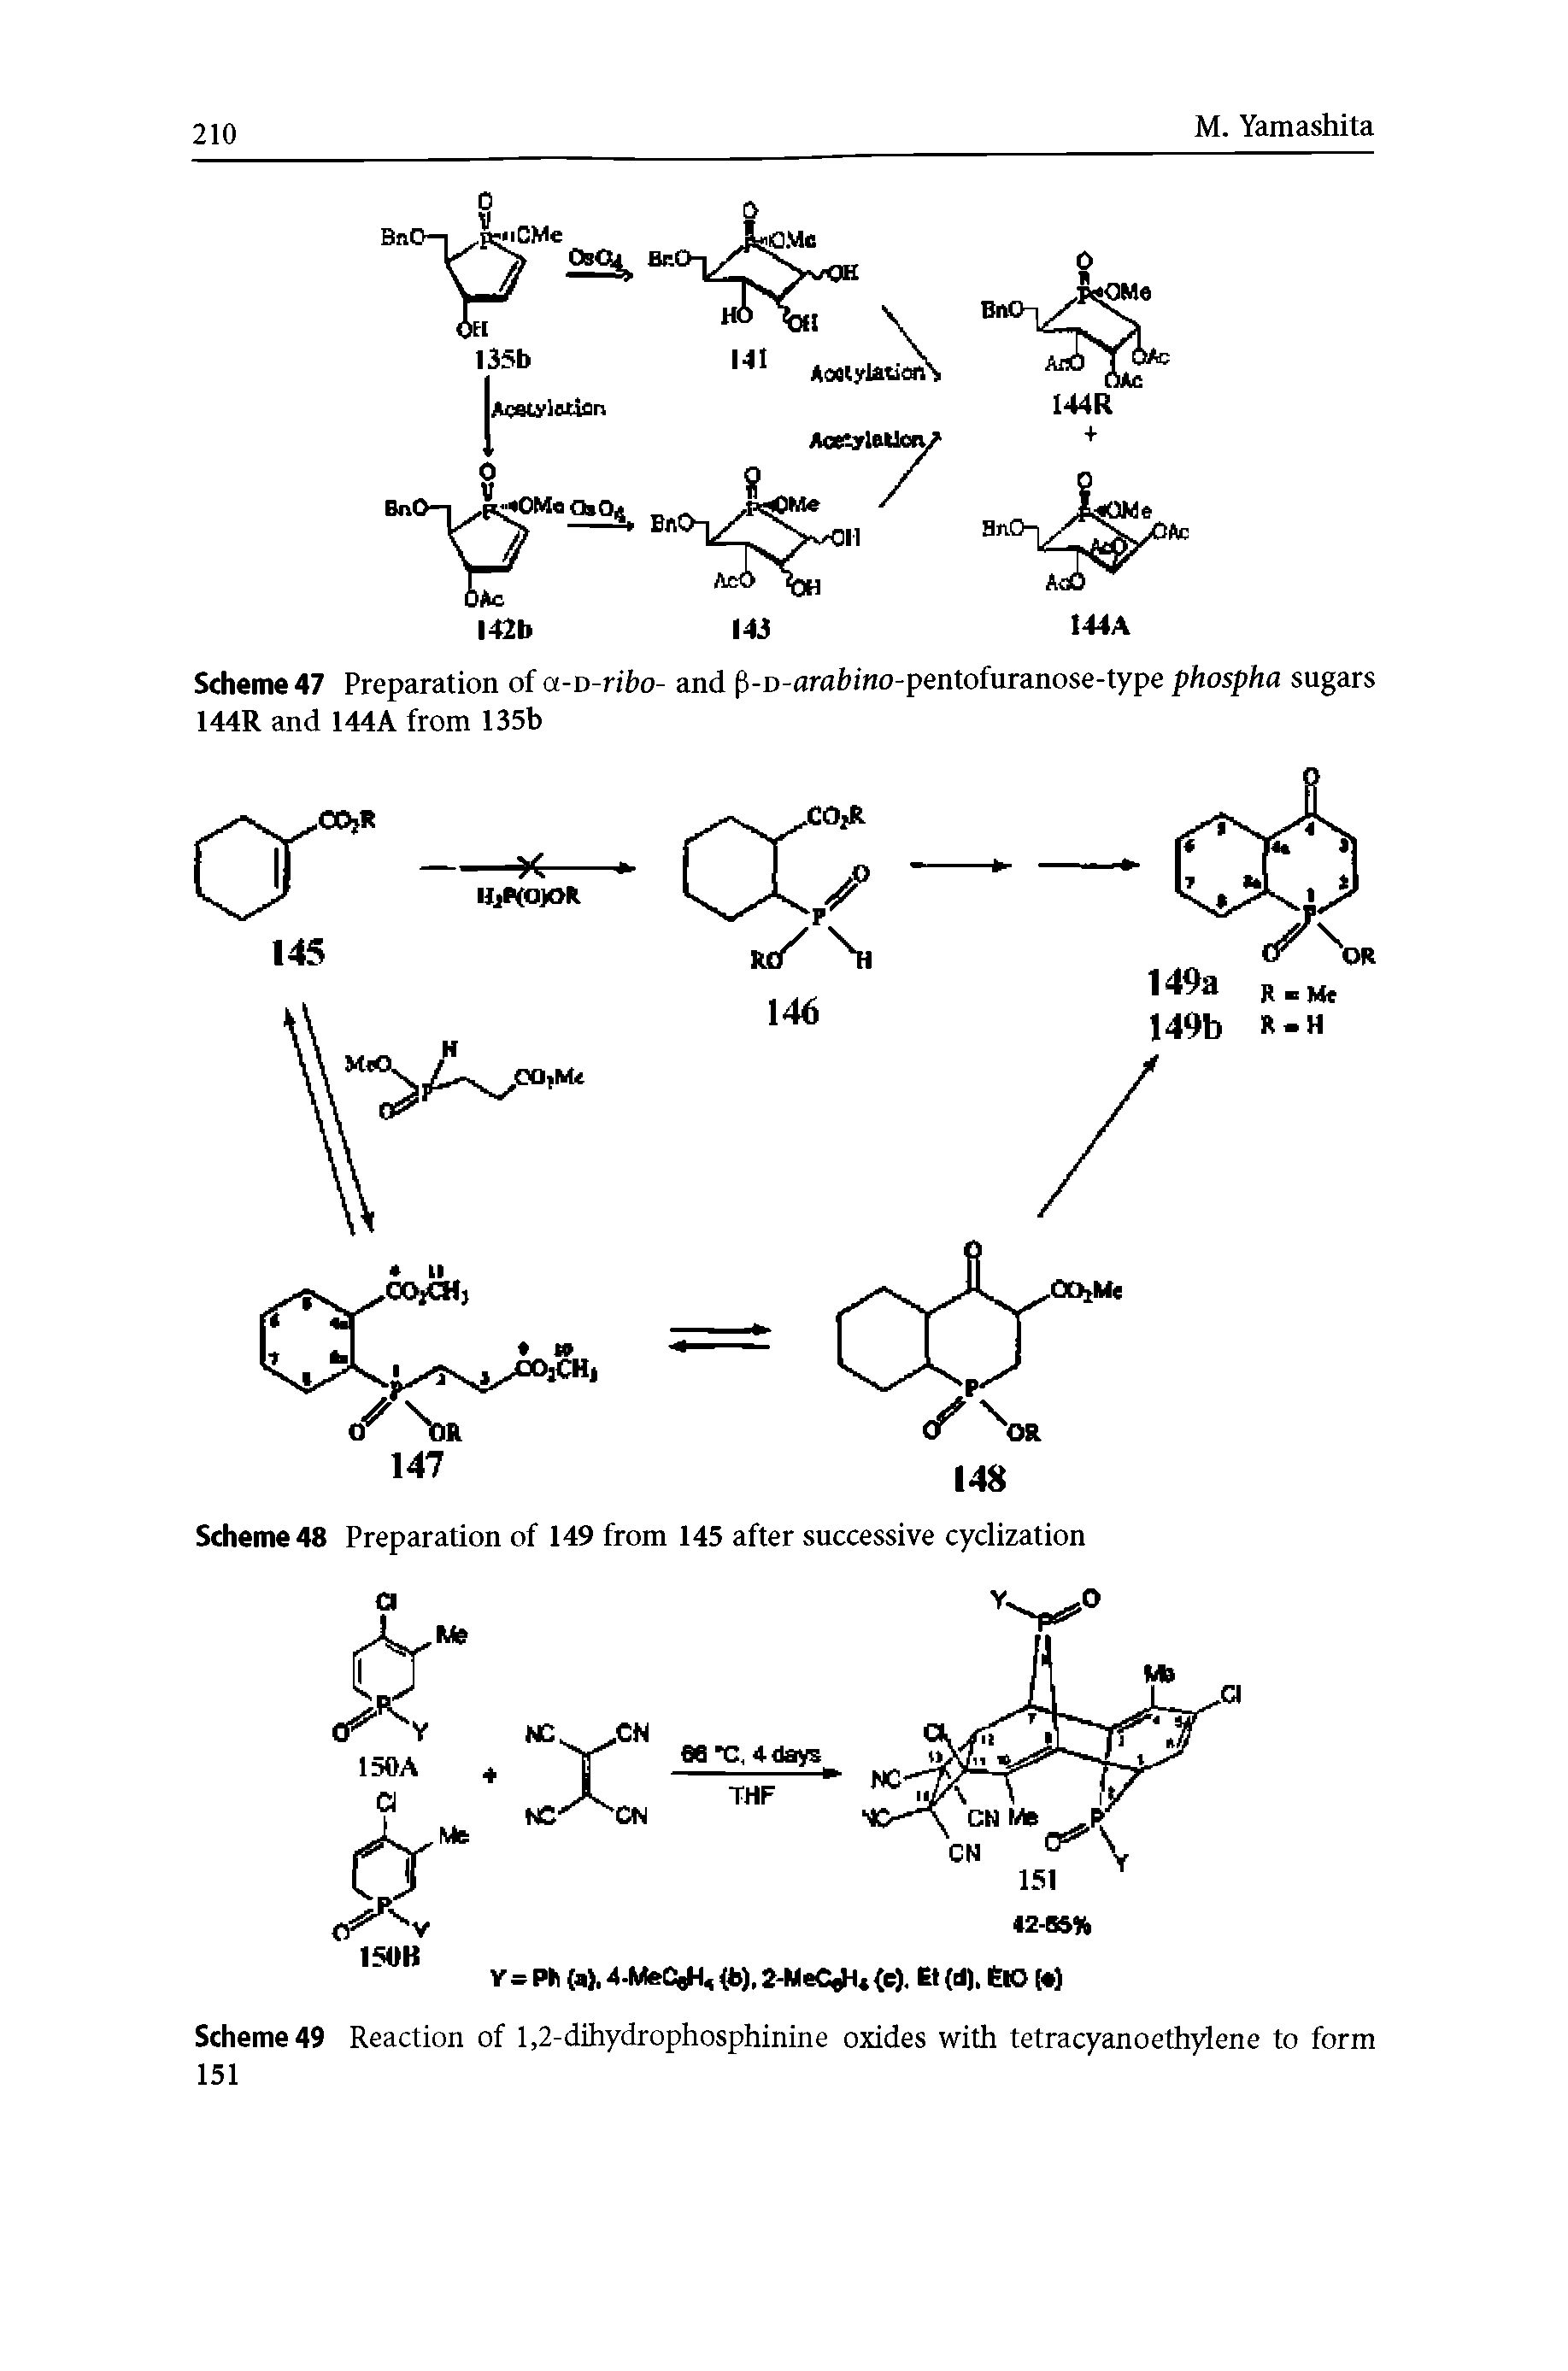 Scheme 47 Preparation of a-v-ribo- and p-D-arafeino-pentofuranose-type phospha sugars 144R and 144A from 135b...